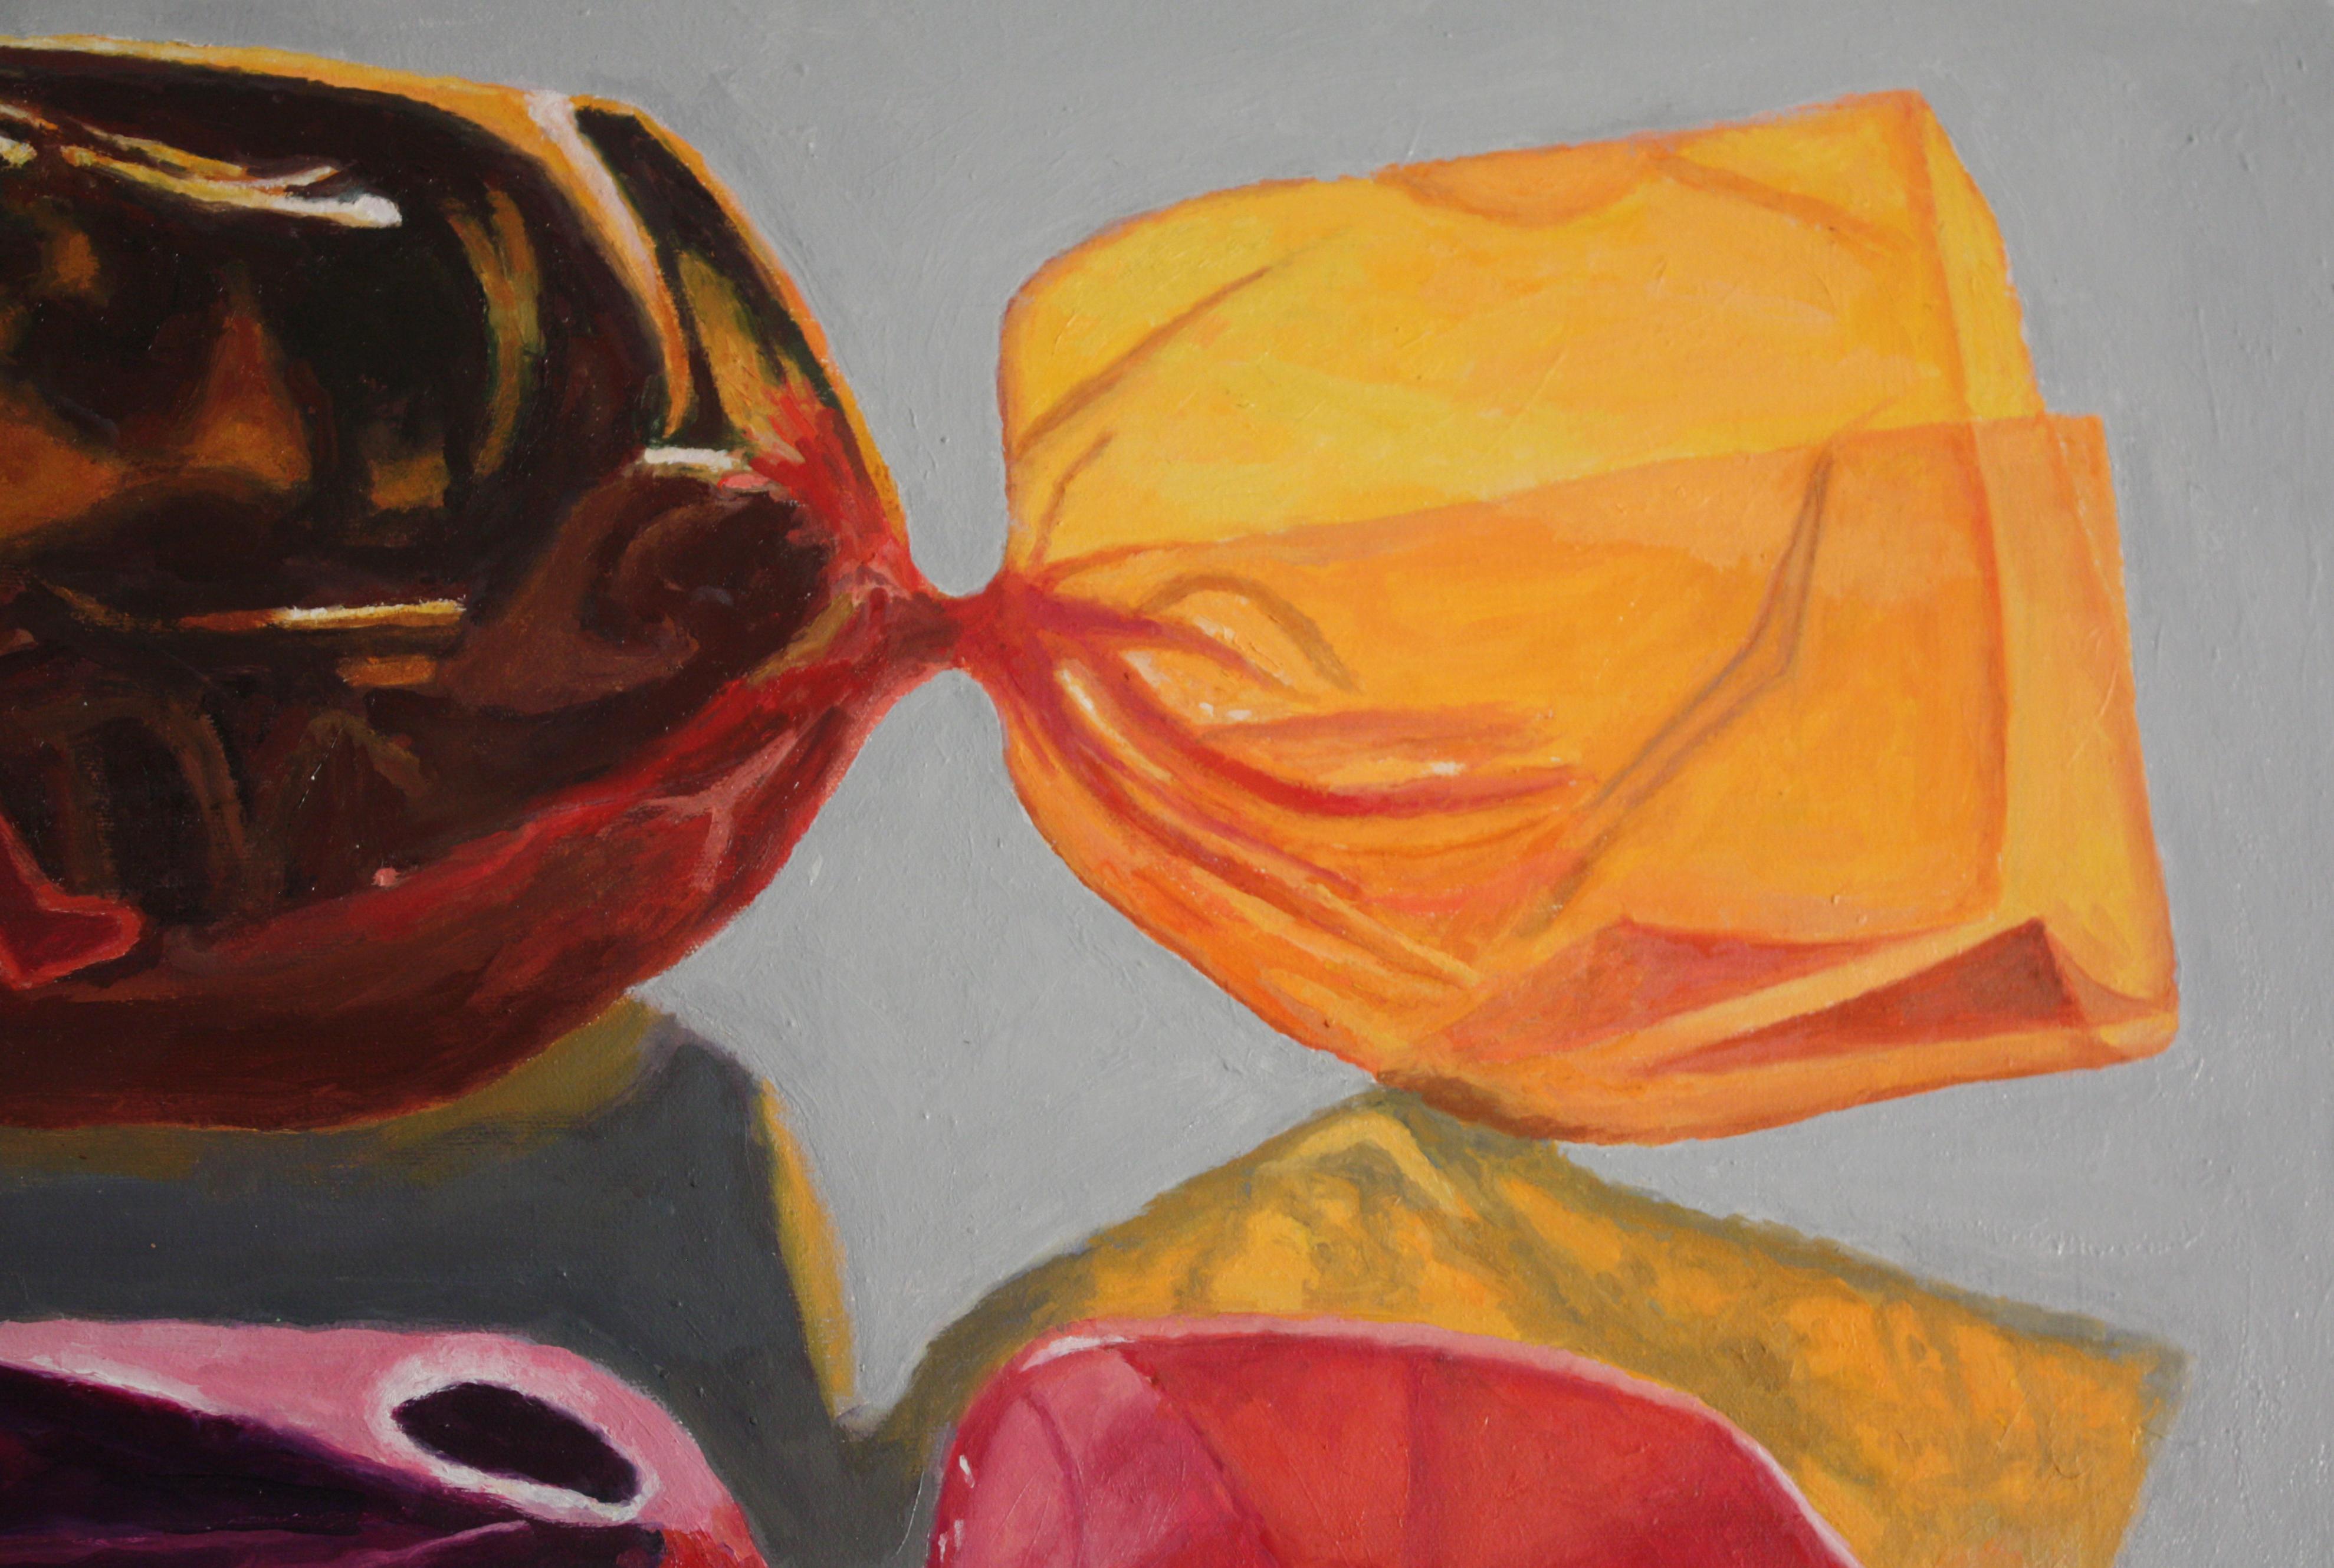 Backlit Candies, colorful super realistic oil painting of wrapped candy - Painting by Douglas Newton